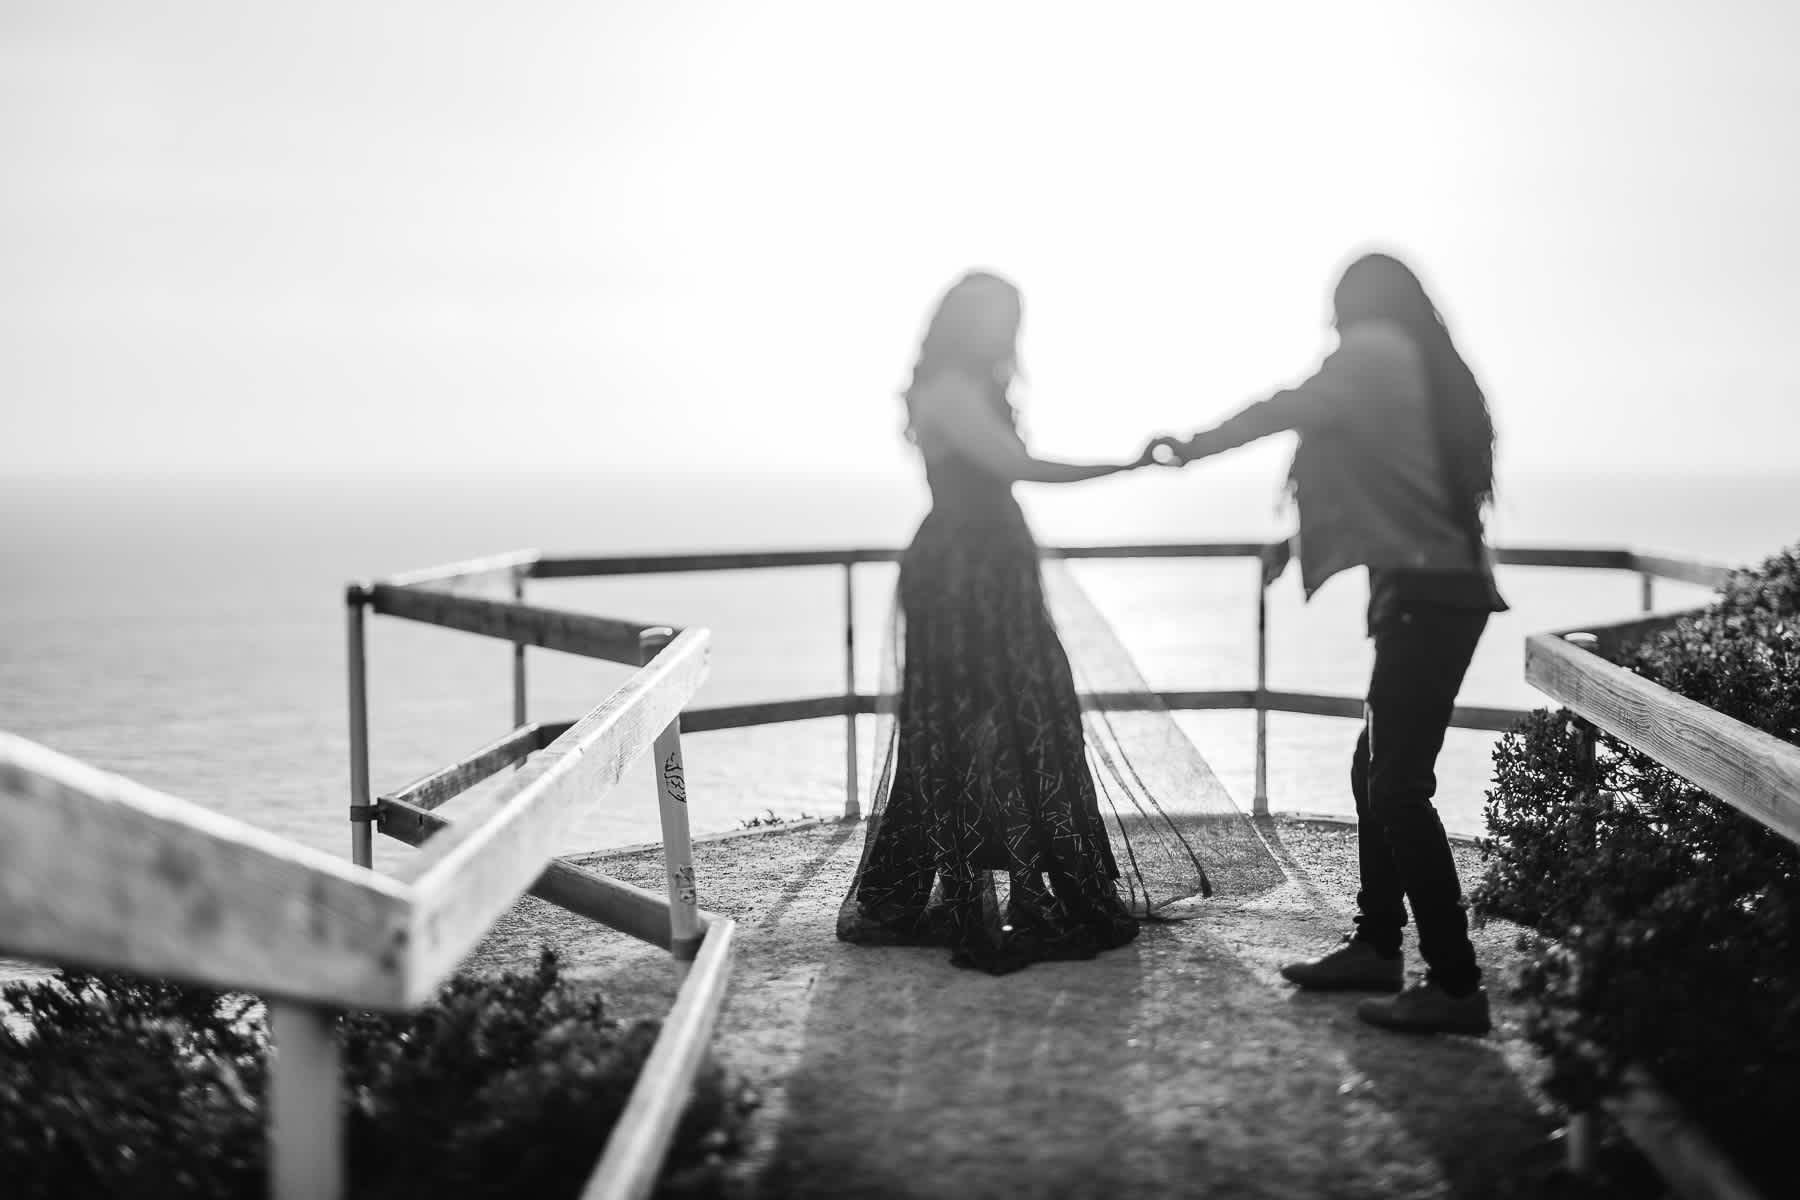 muir-beach-ca-spring-lifestyle-engagement-session-13